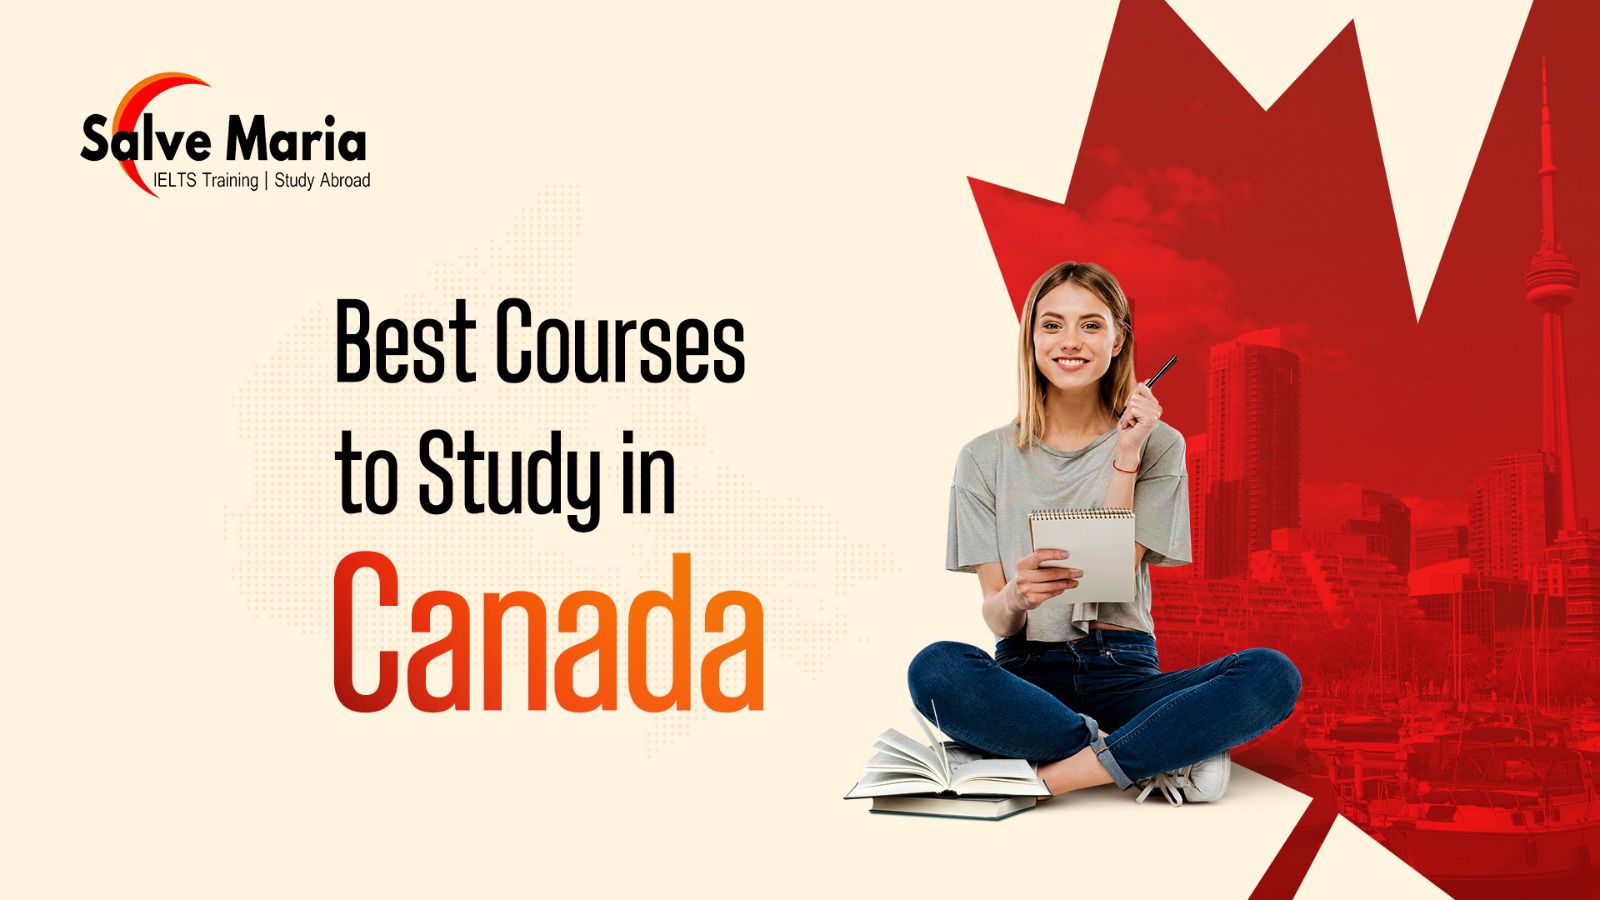 The Best Courses to Study in Canada